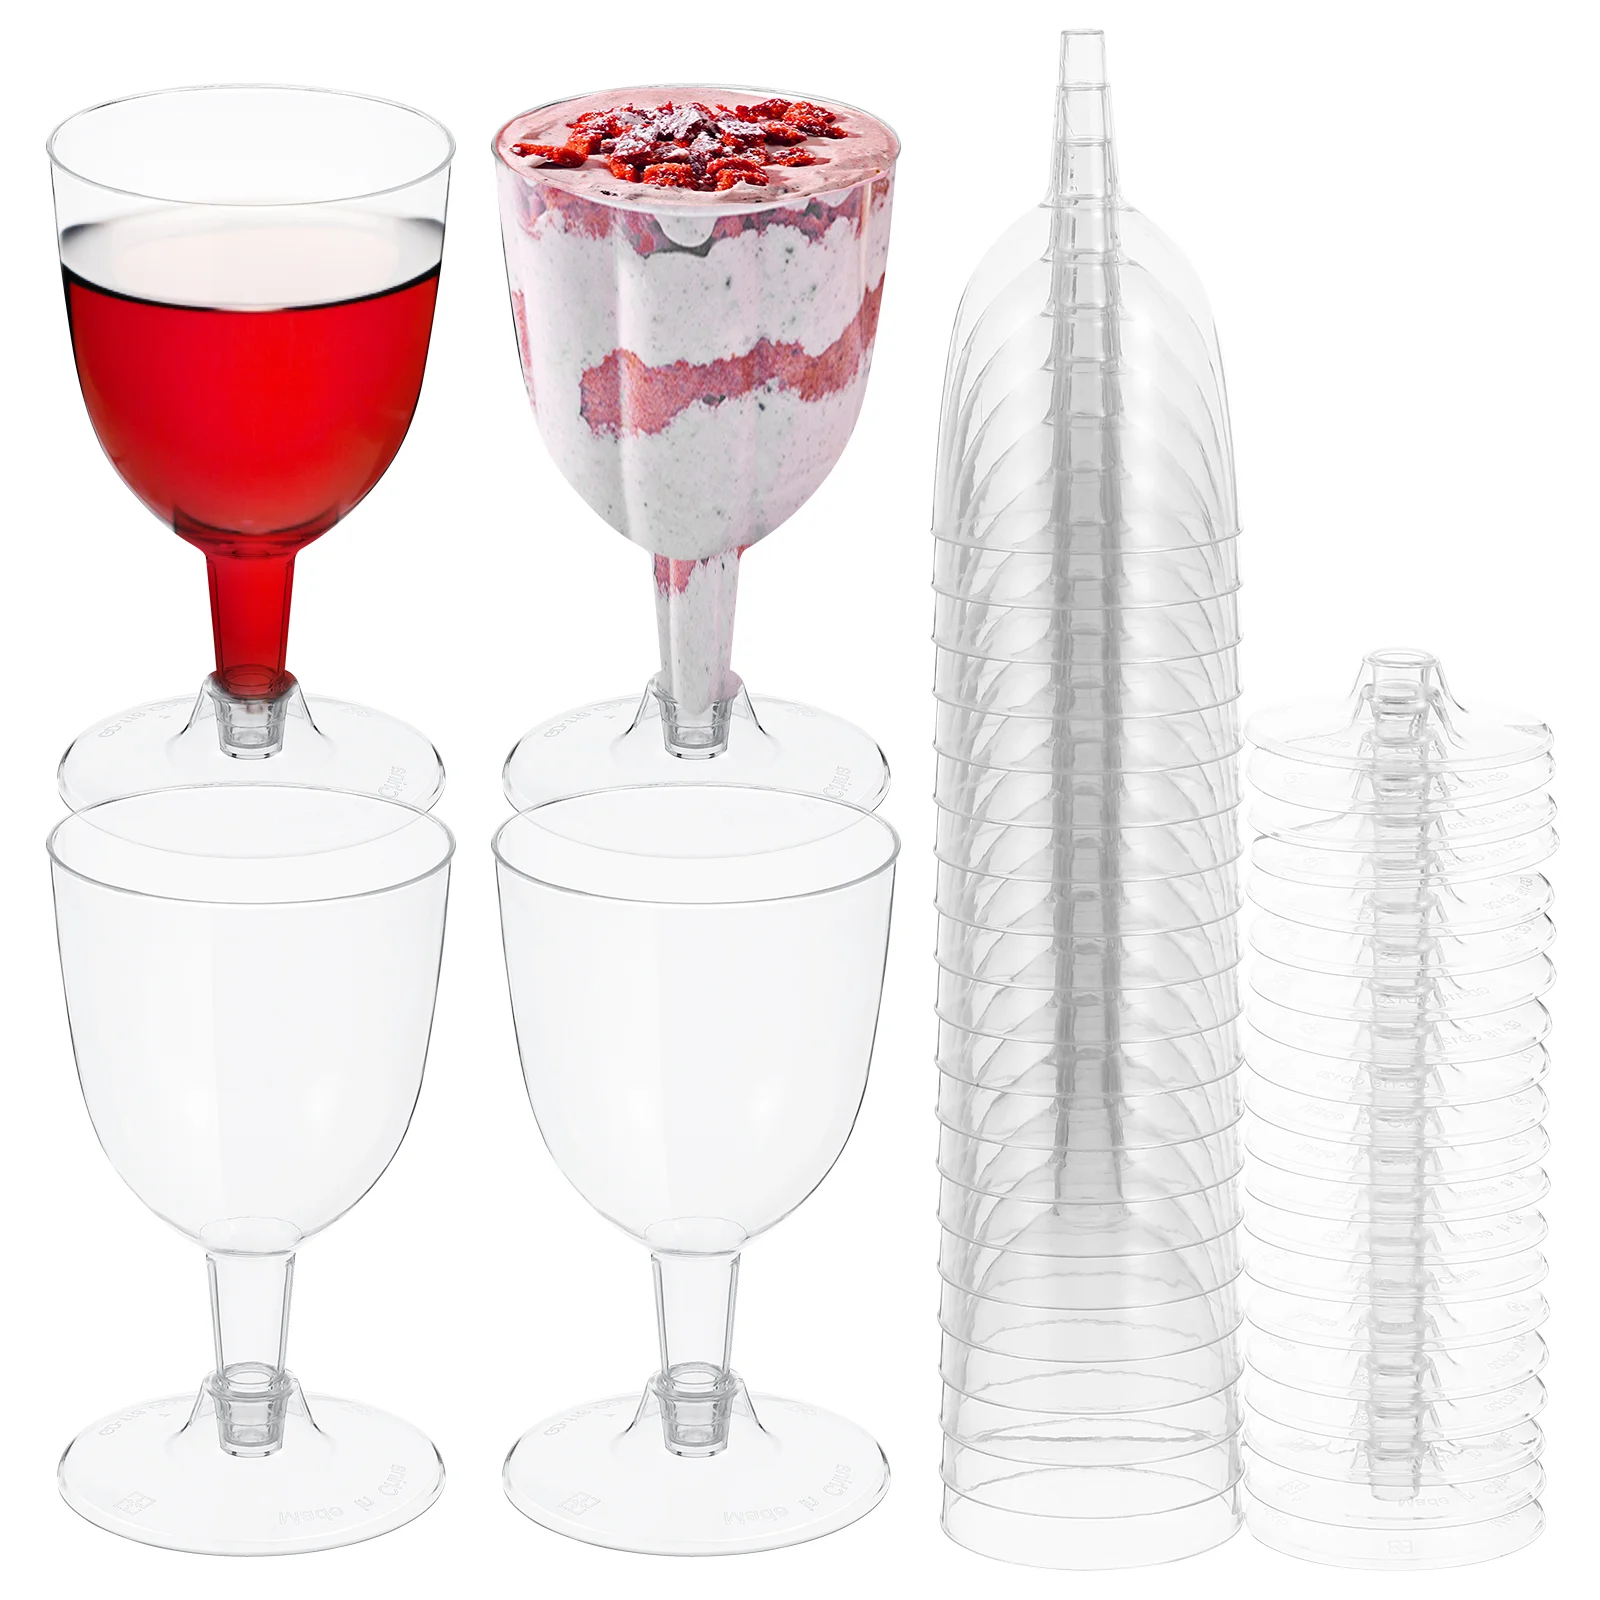 

20 Pcs Ice Cream Pudding Cups Plastic Toasting Clear Red Glass Party Mousse Flutes Disposable Containers For parties